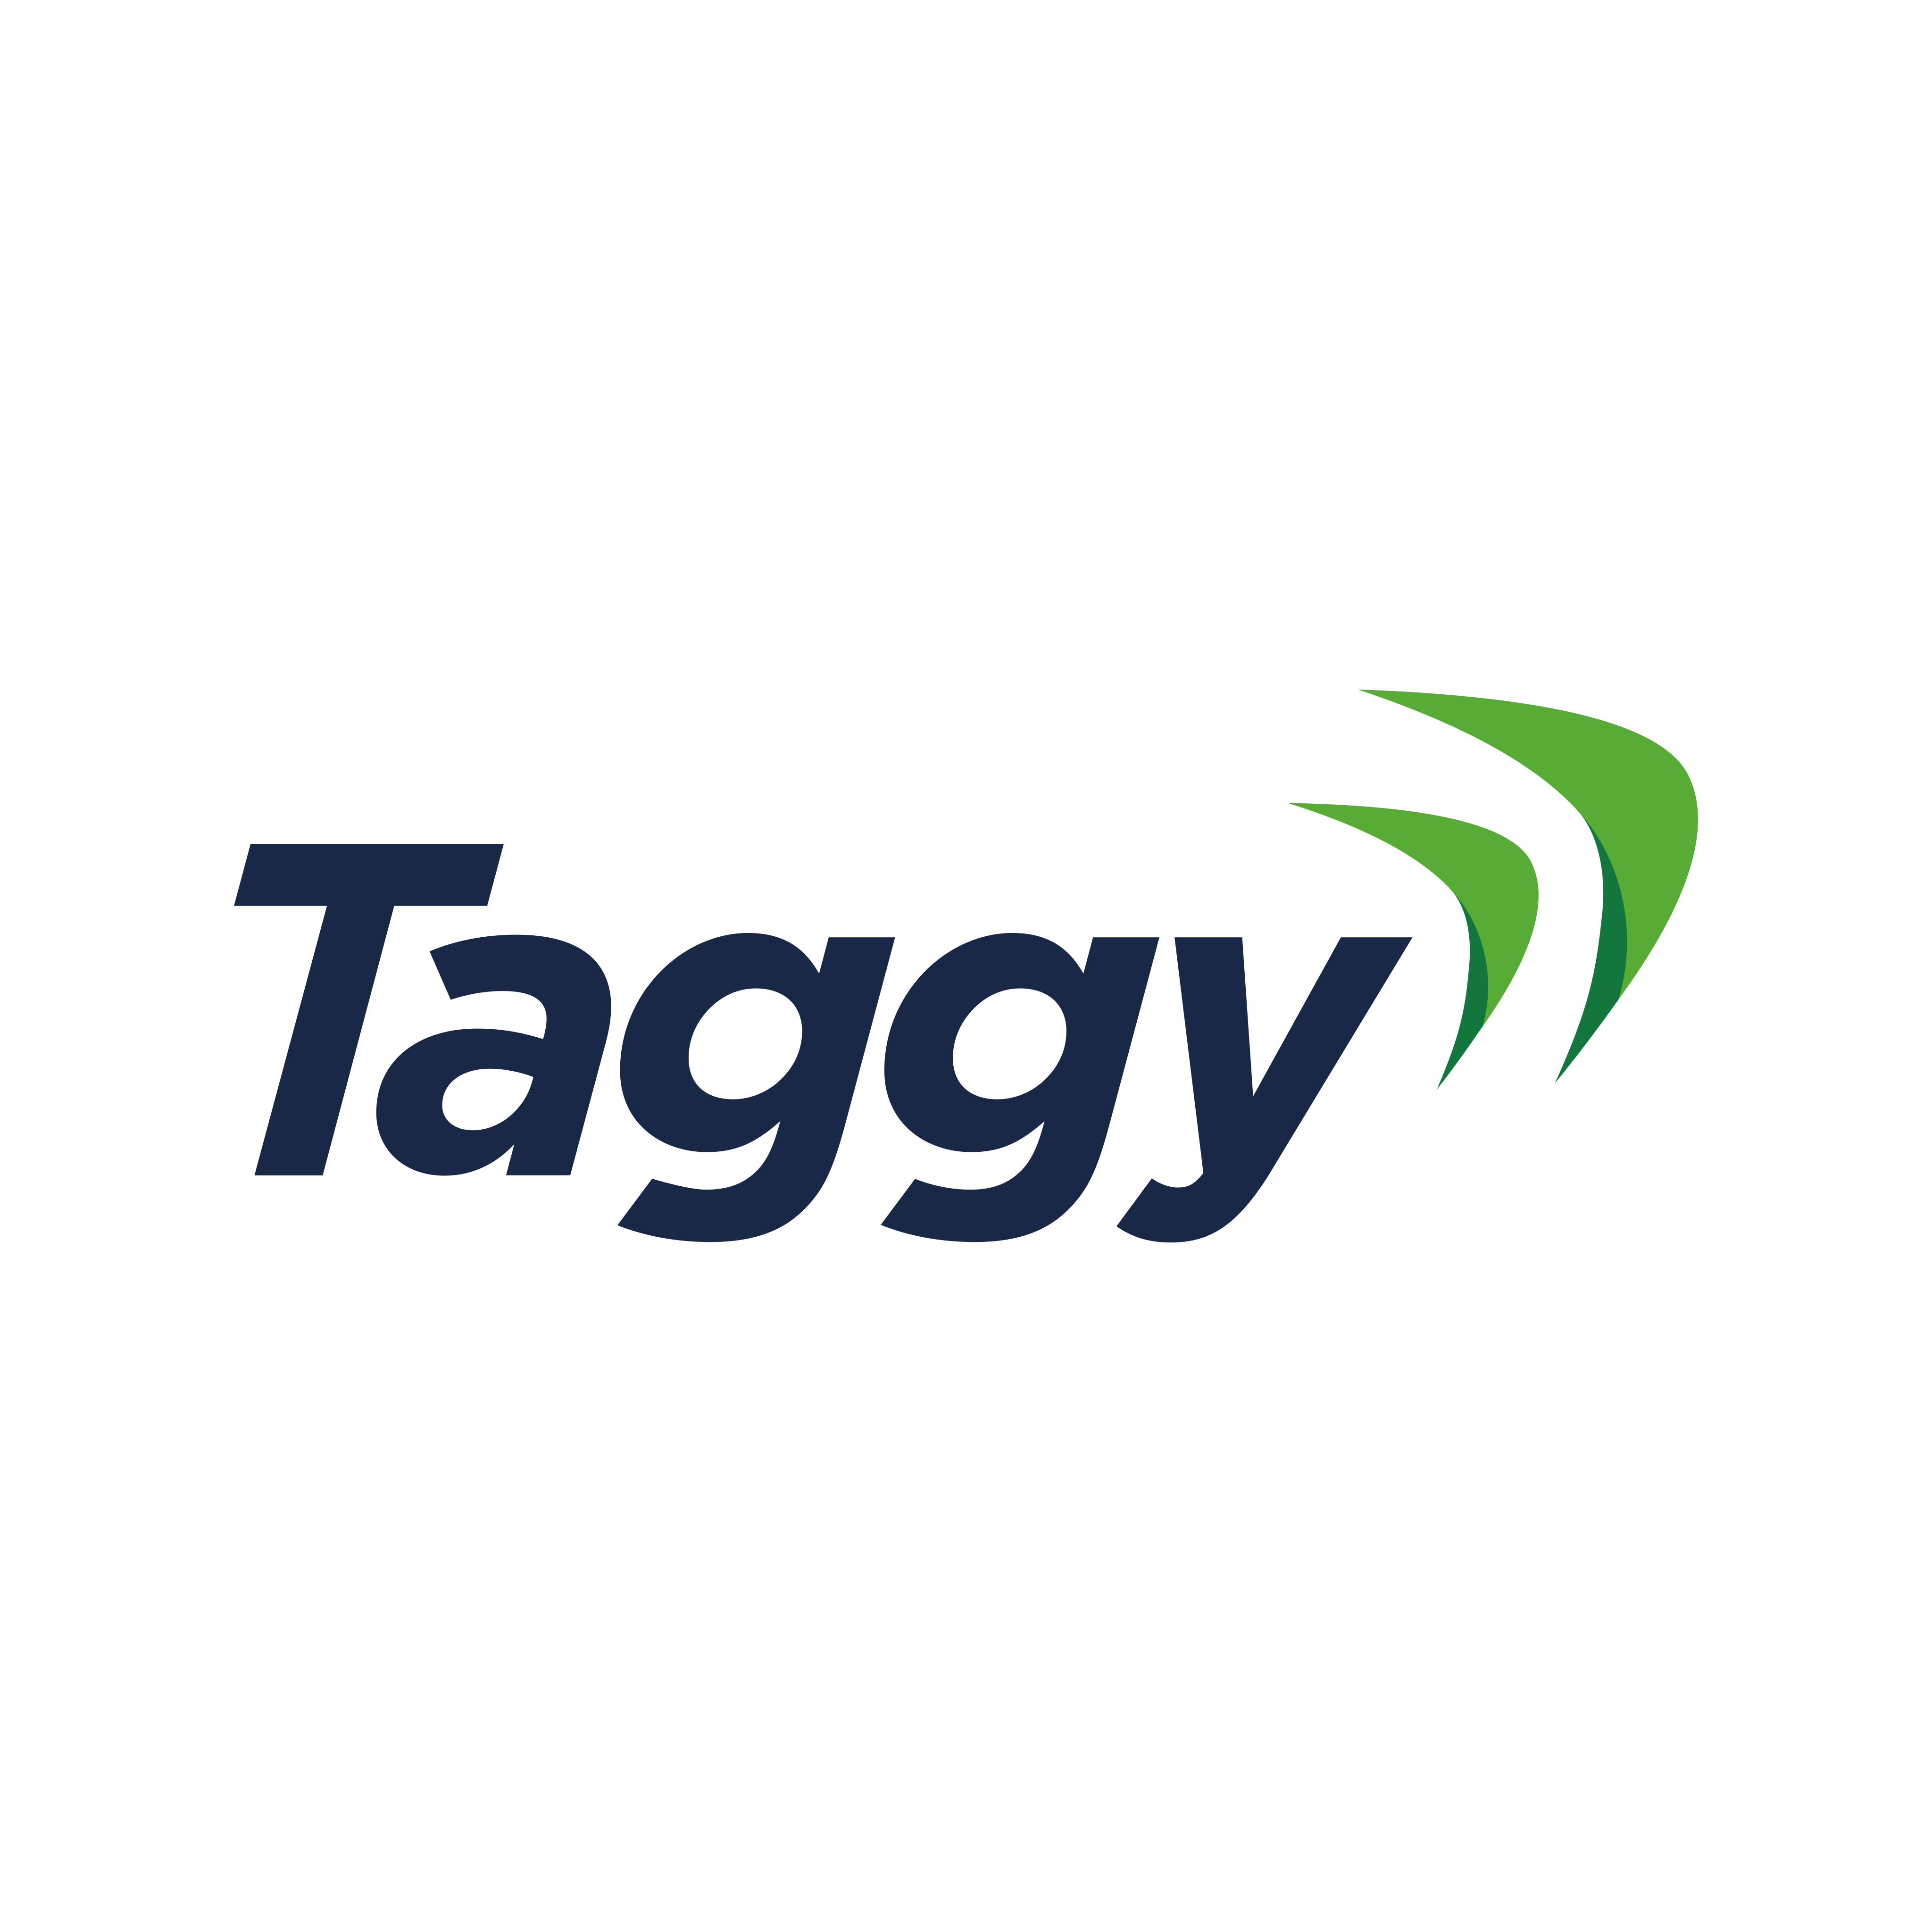 Taggy Logo PNG.